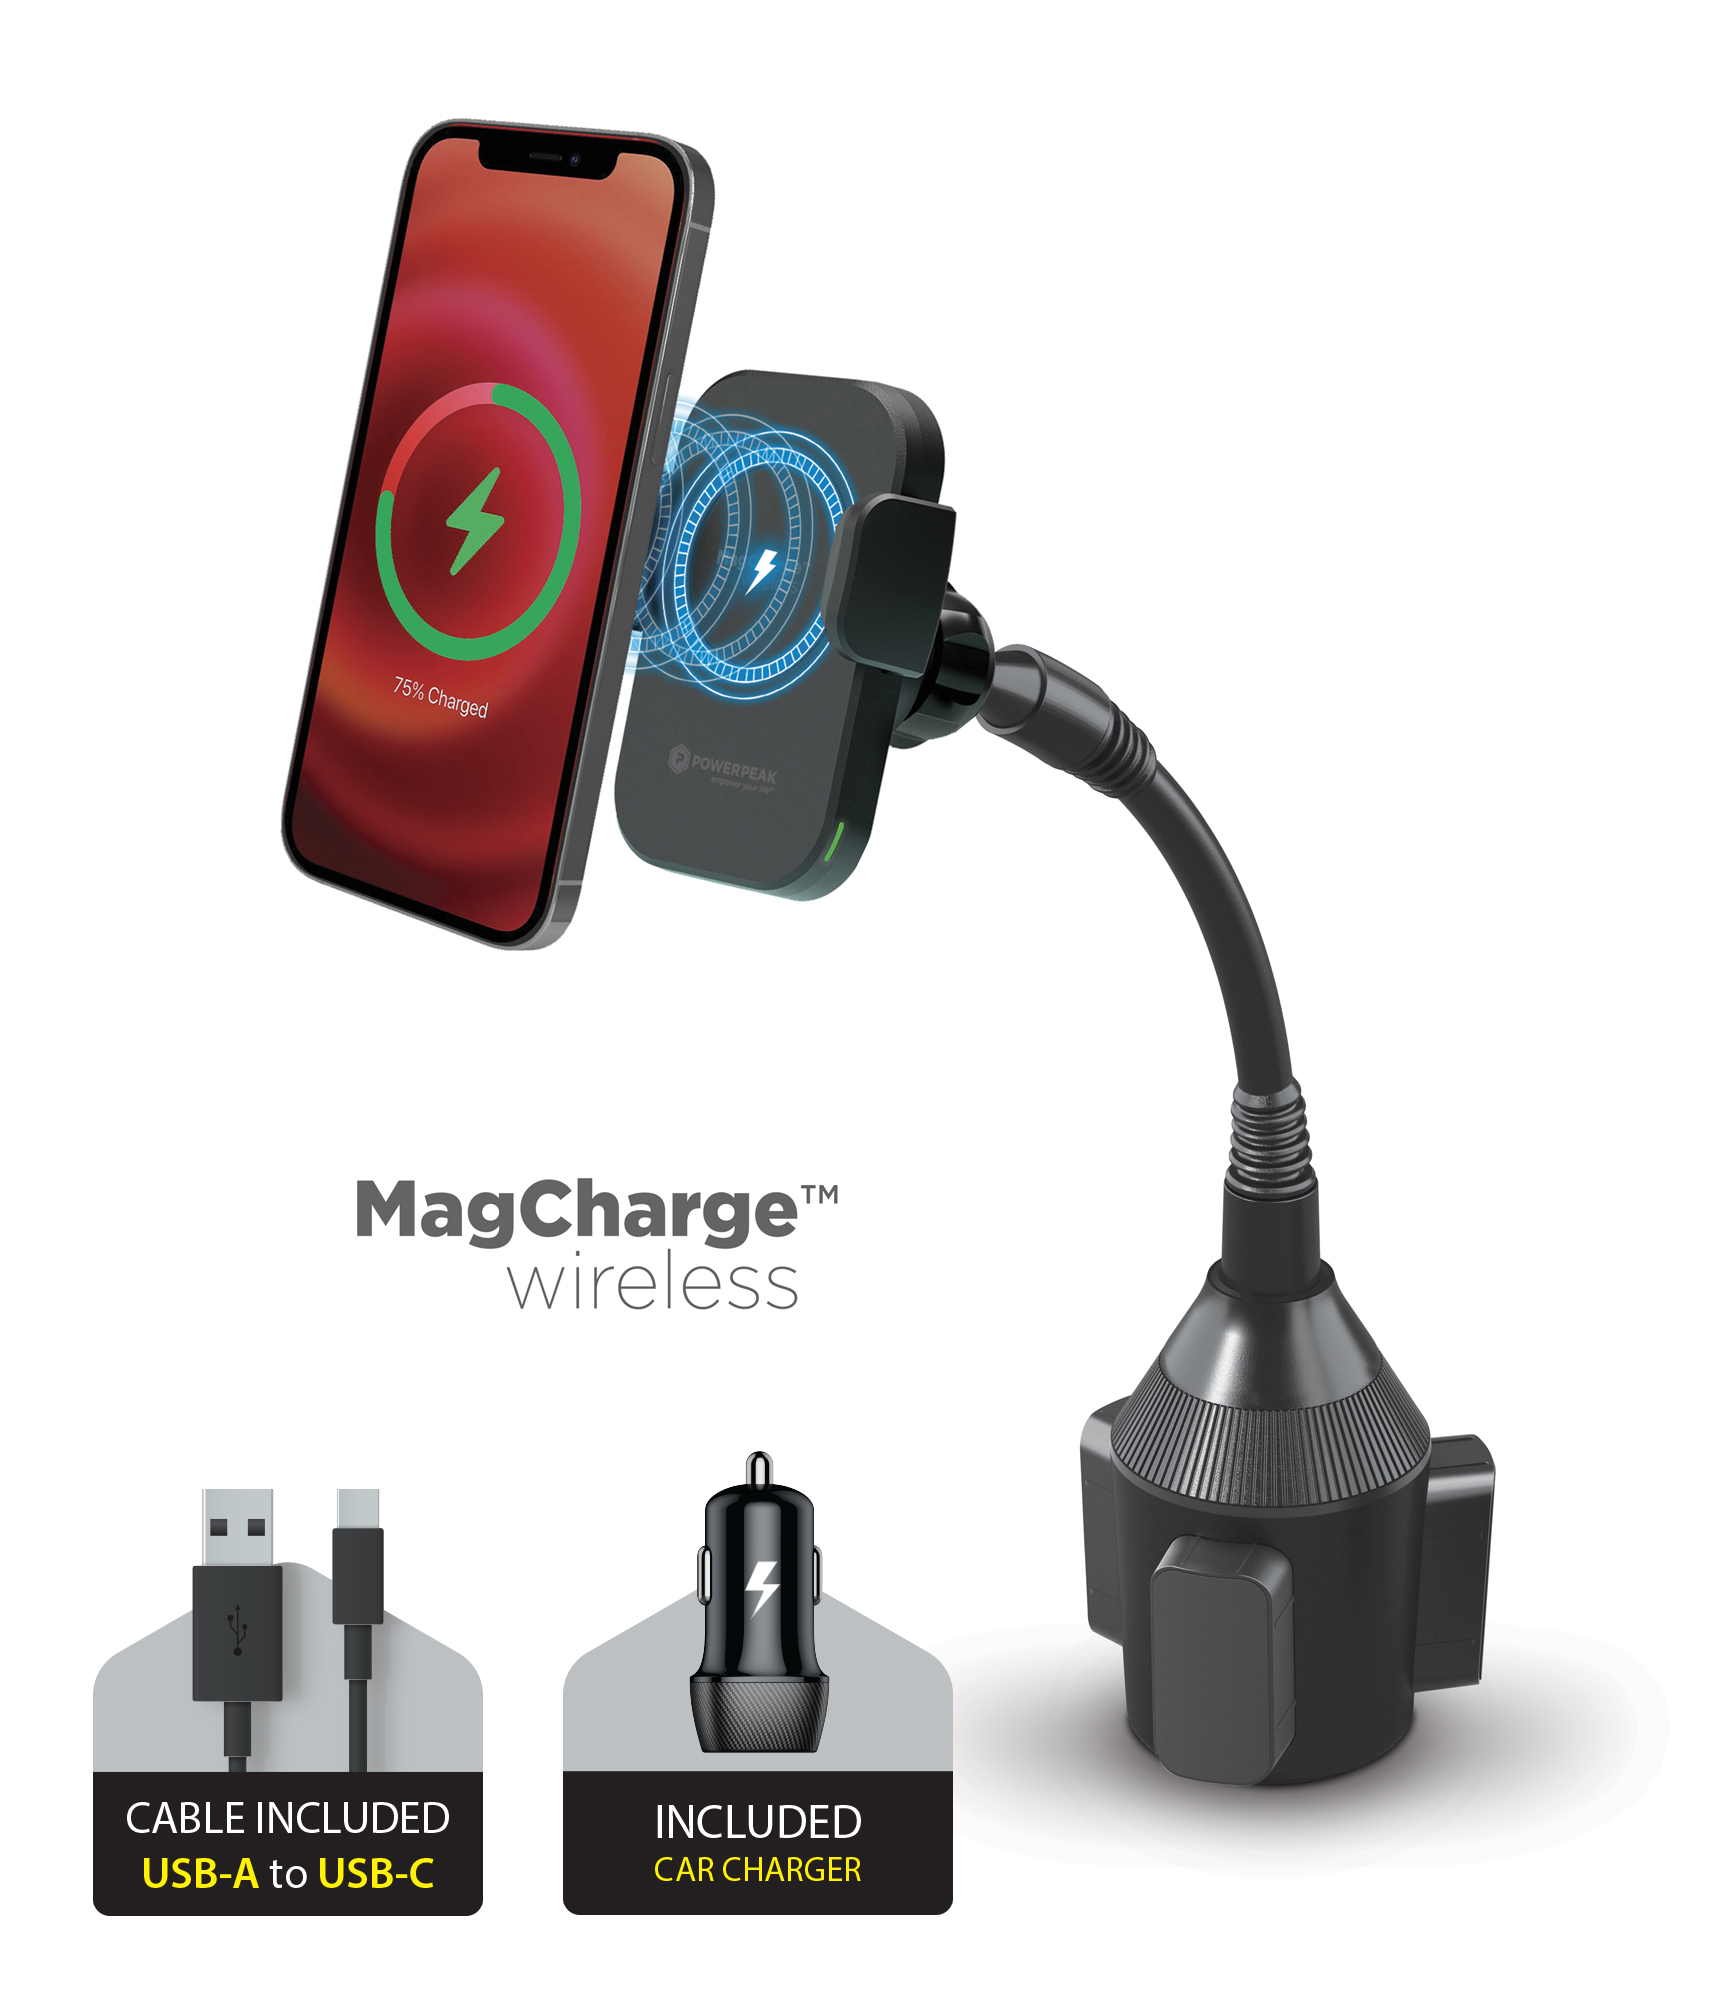 Black Magnetic Magcharge Car Cup Mount Holder with Magnetic Auto-Alignment. Included car charger and cable USB-A to USB-C